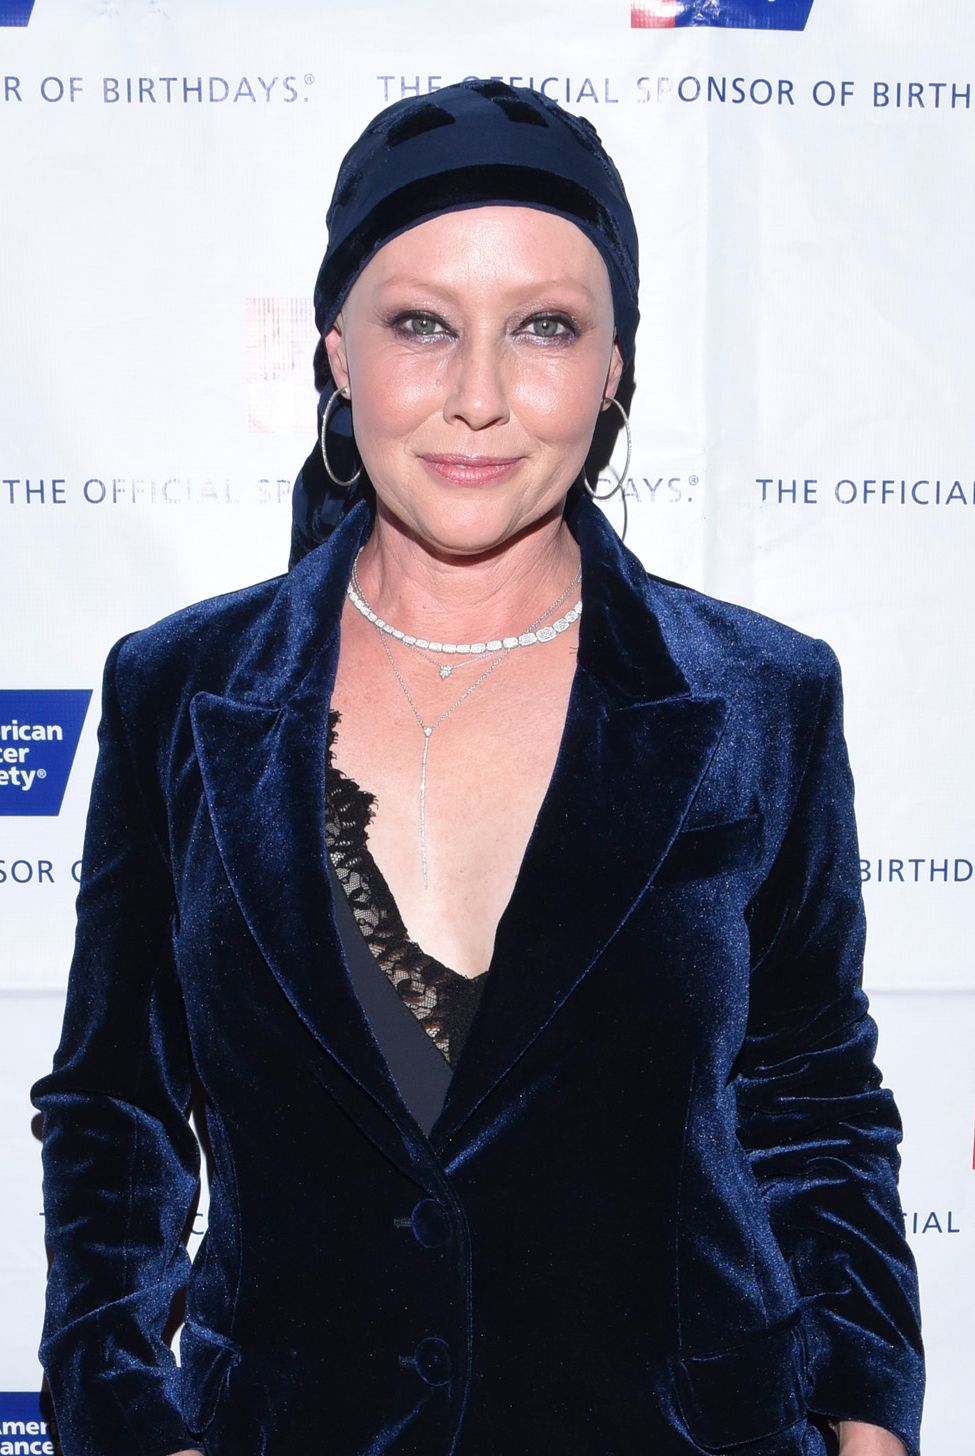 Actress Shannen Doherty arrives at American Cancer Society's Giants of Science Los Angeles Gala on November 5, 2016 in Los Angeles, California